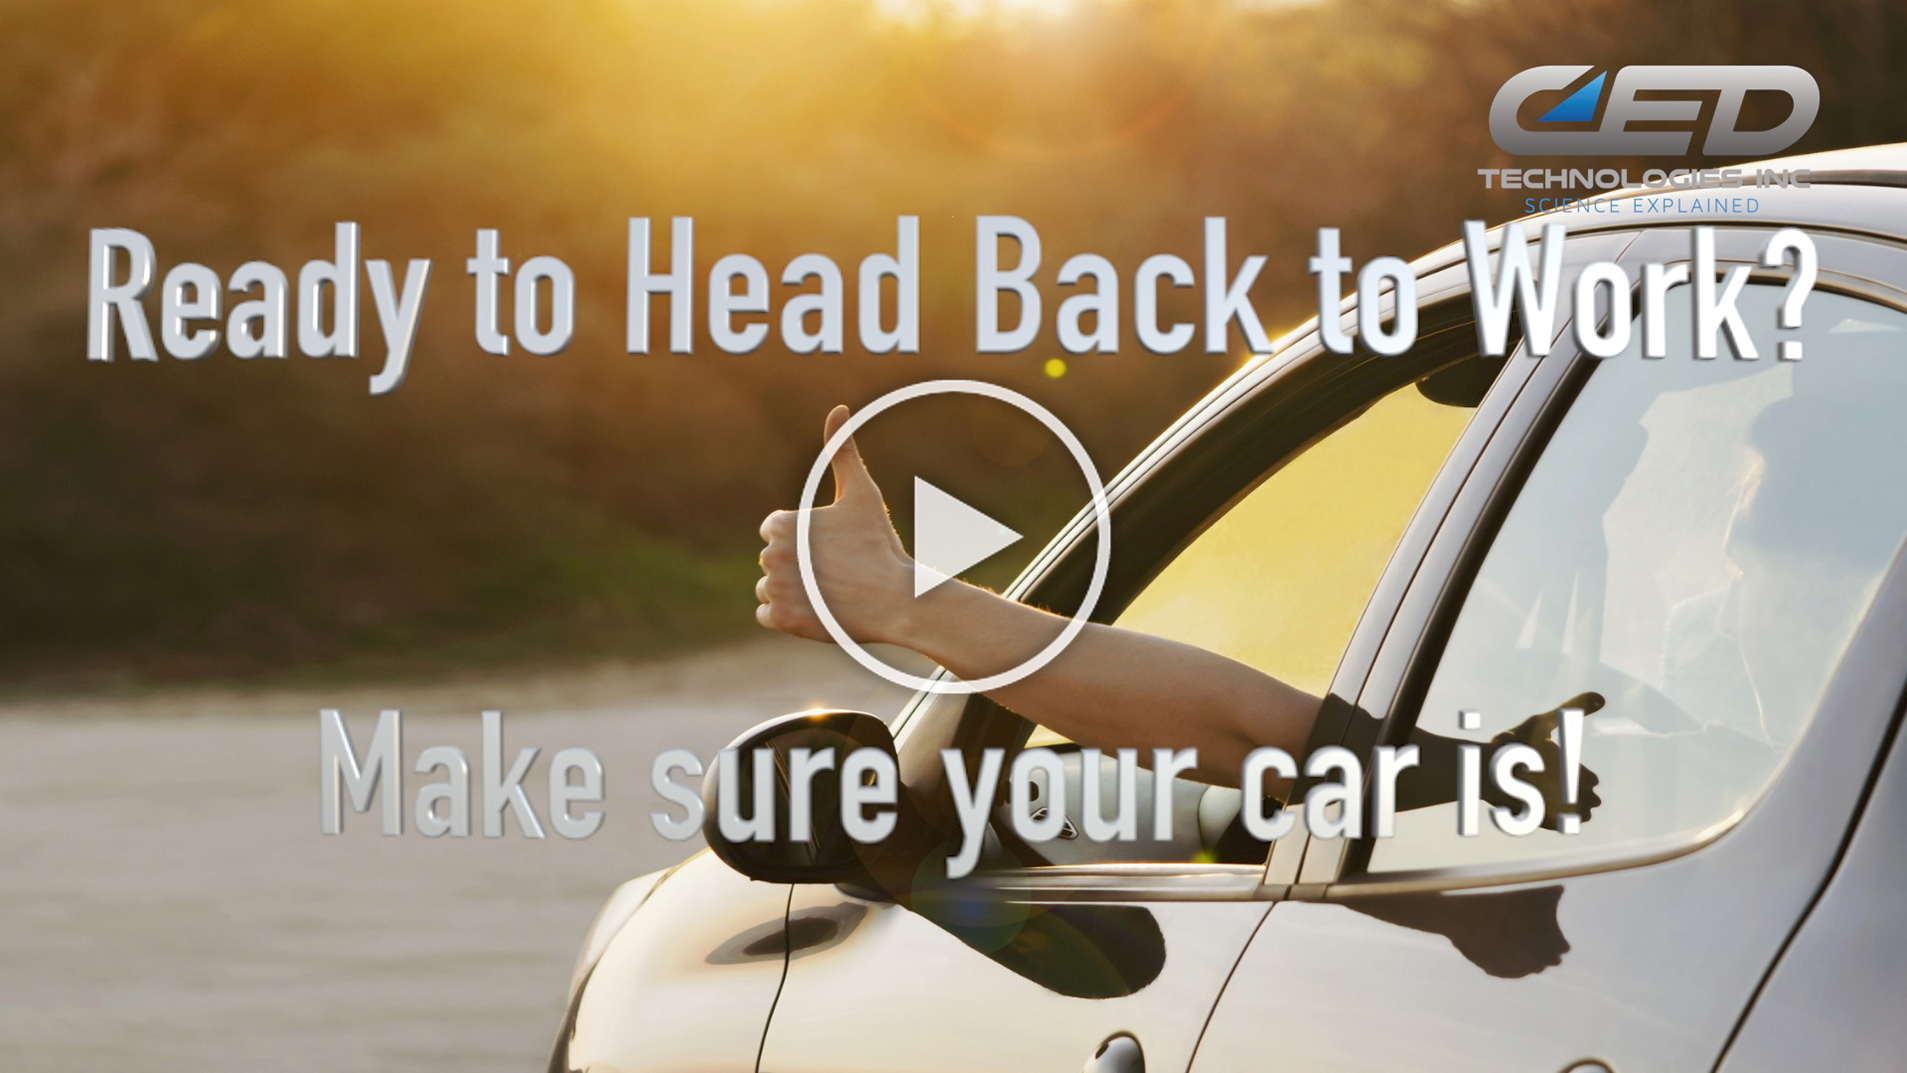 Ready to head back to work? – Make sure your car is!